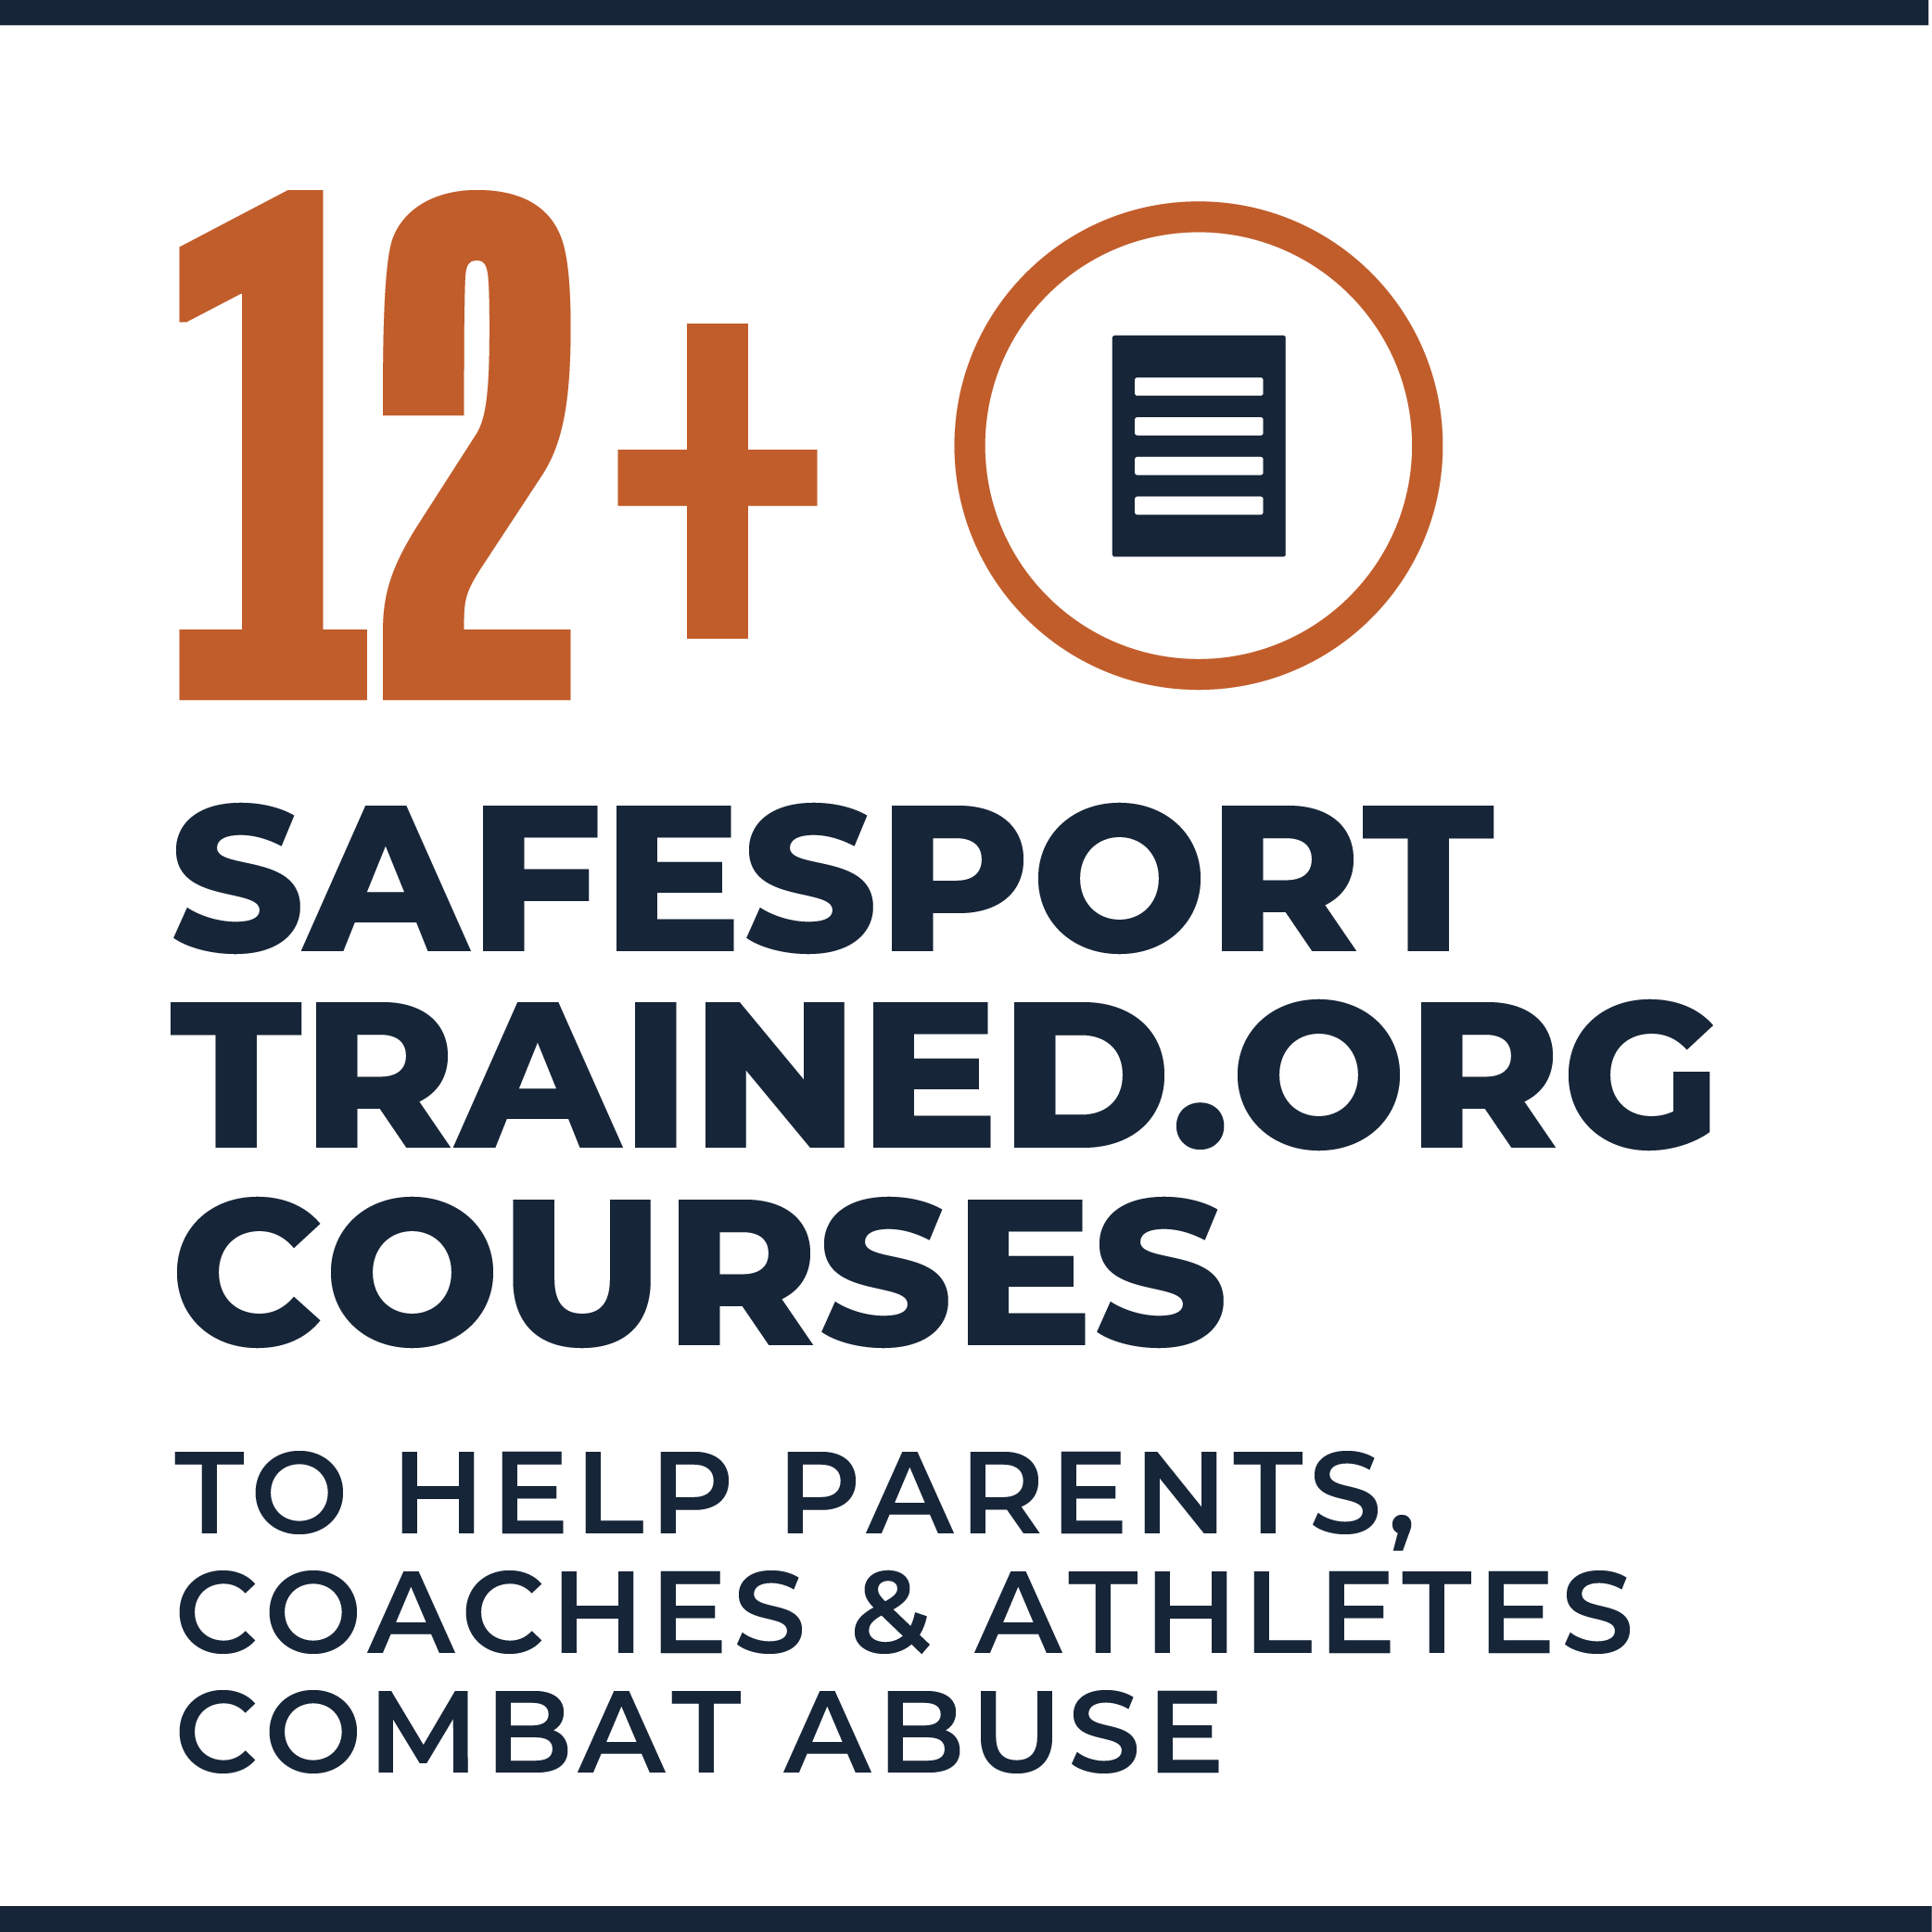 12+ SafeSport trained.org courses to help parents, coaches and athletes combat abuse